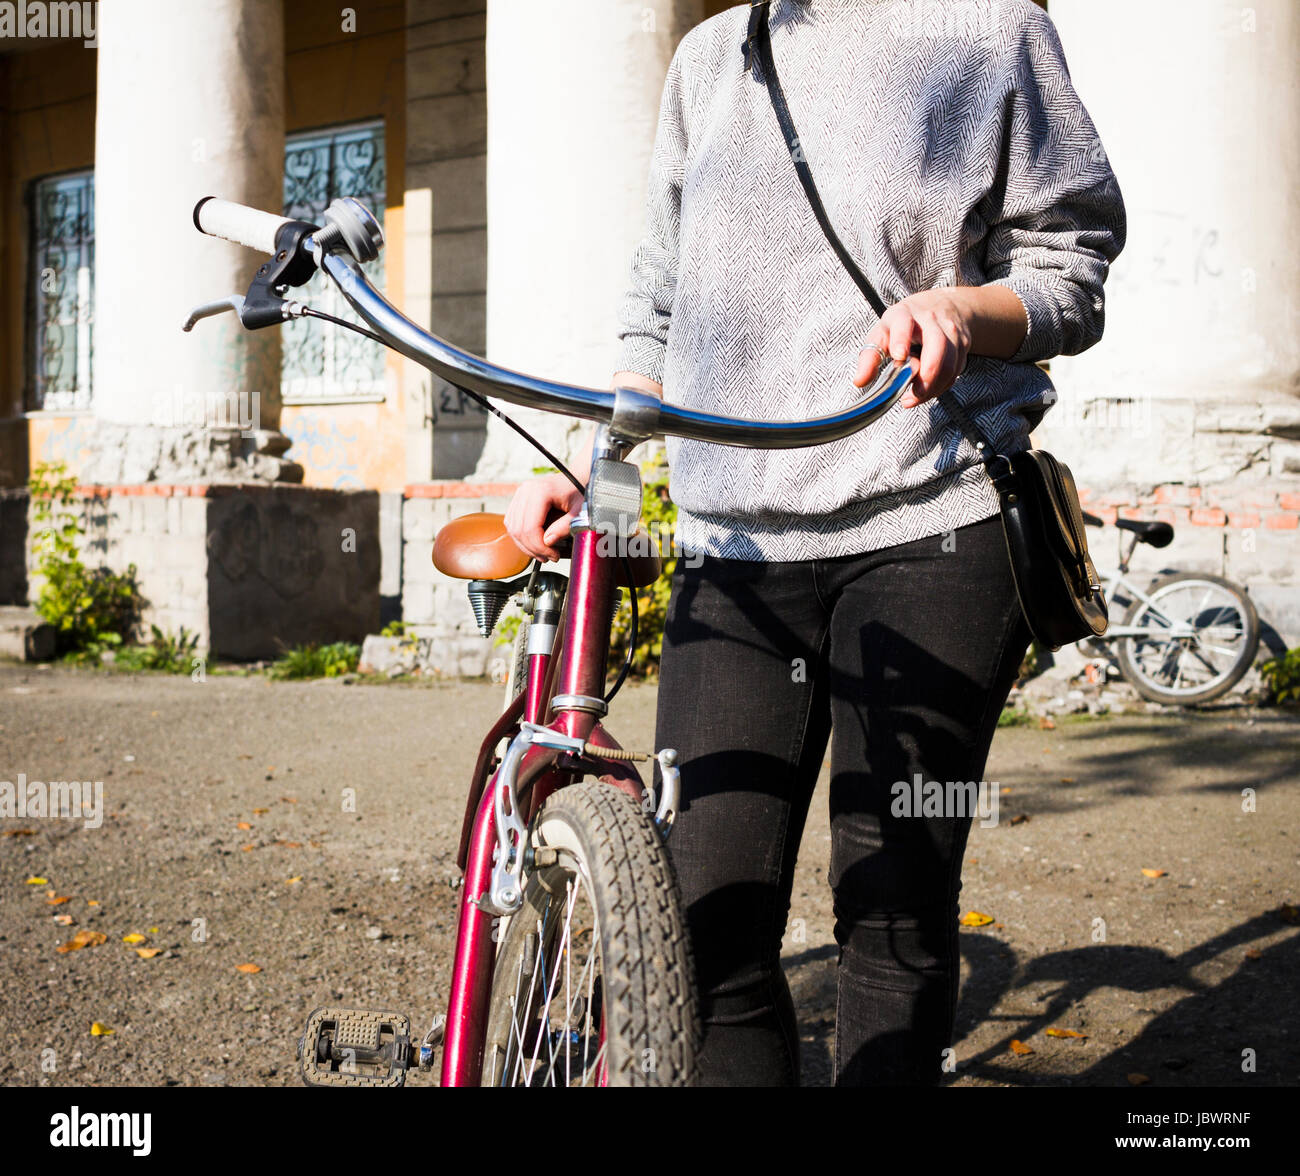 Neck down view of young woman with bicycle in urban area Stock Photo